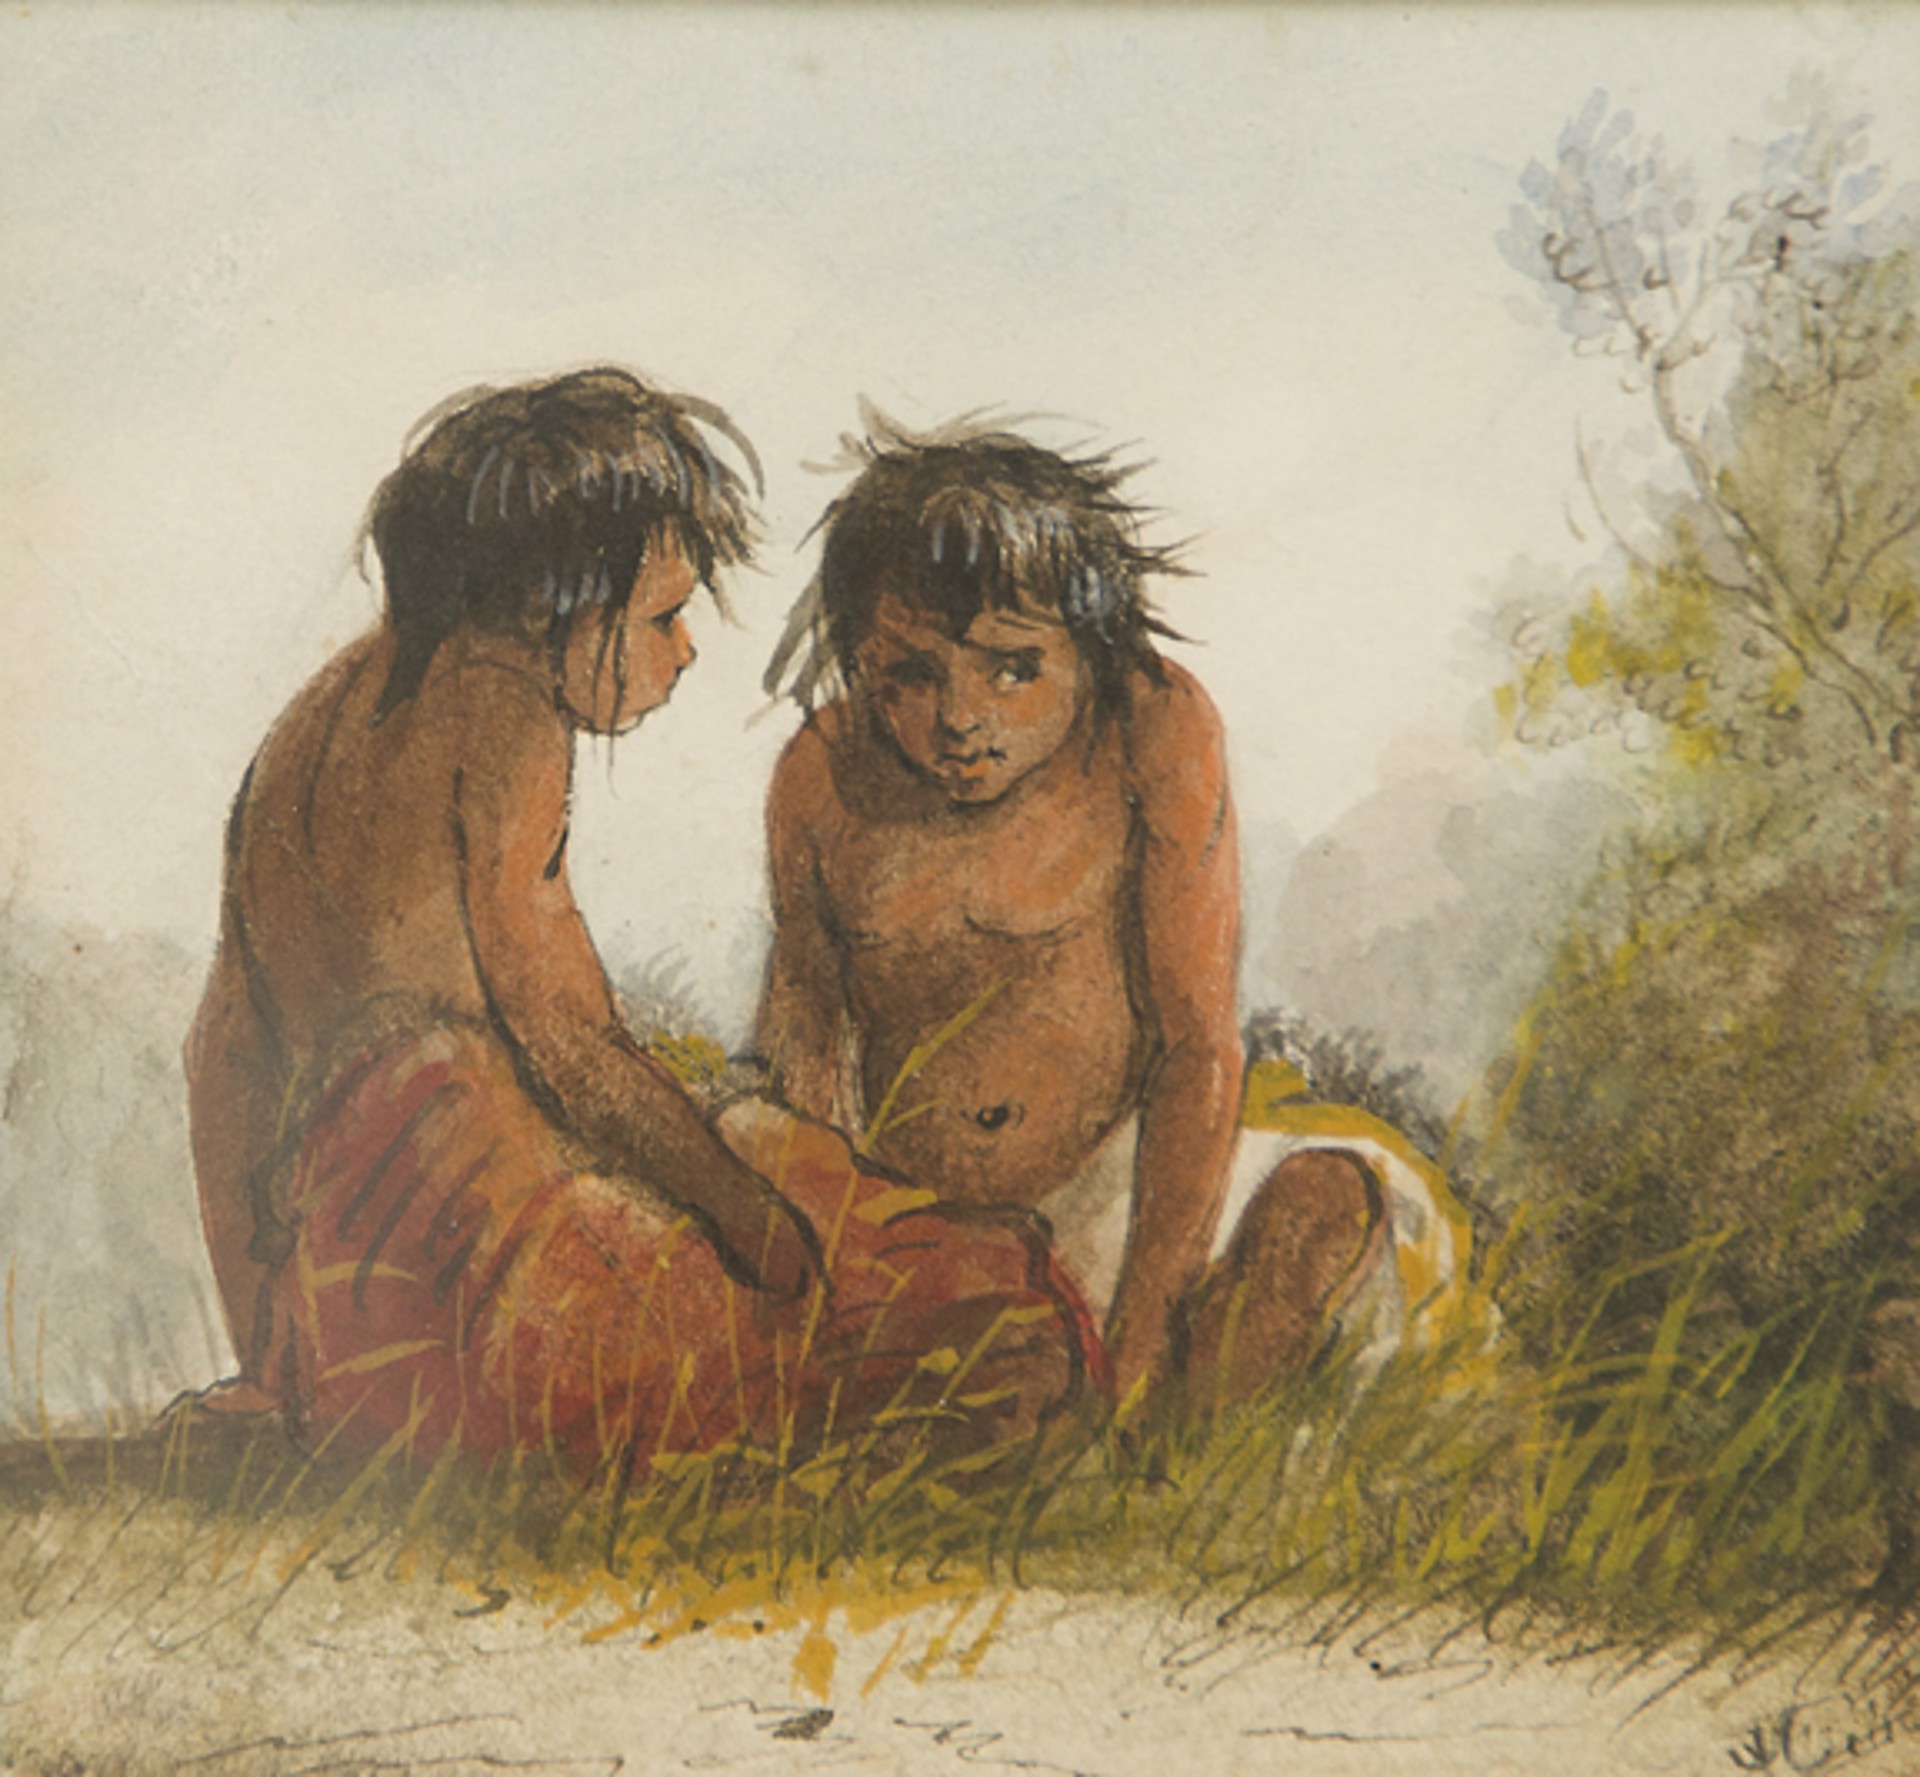 Children's Pow-Wow by Alfred Jacob Miller